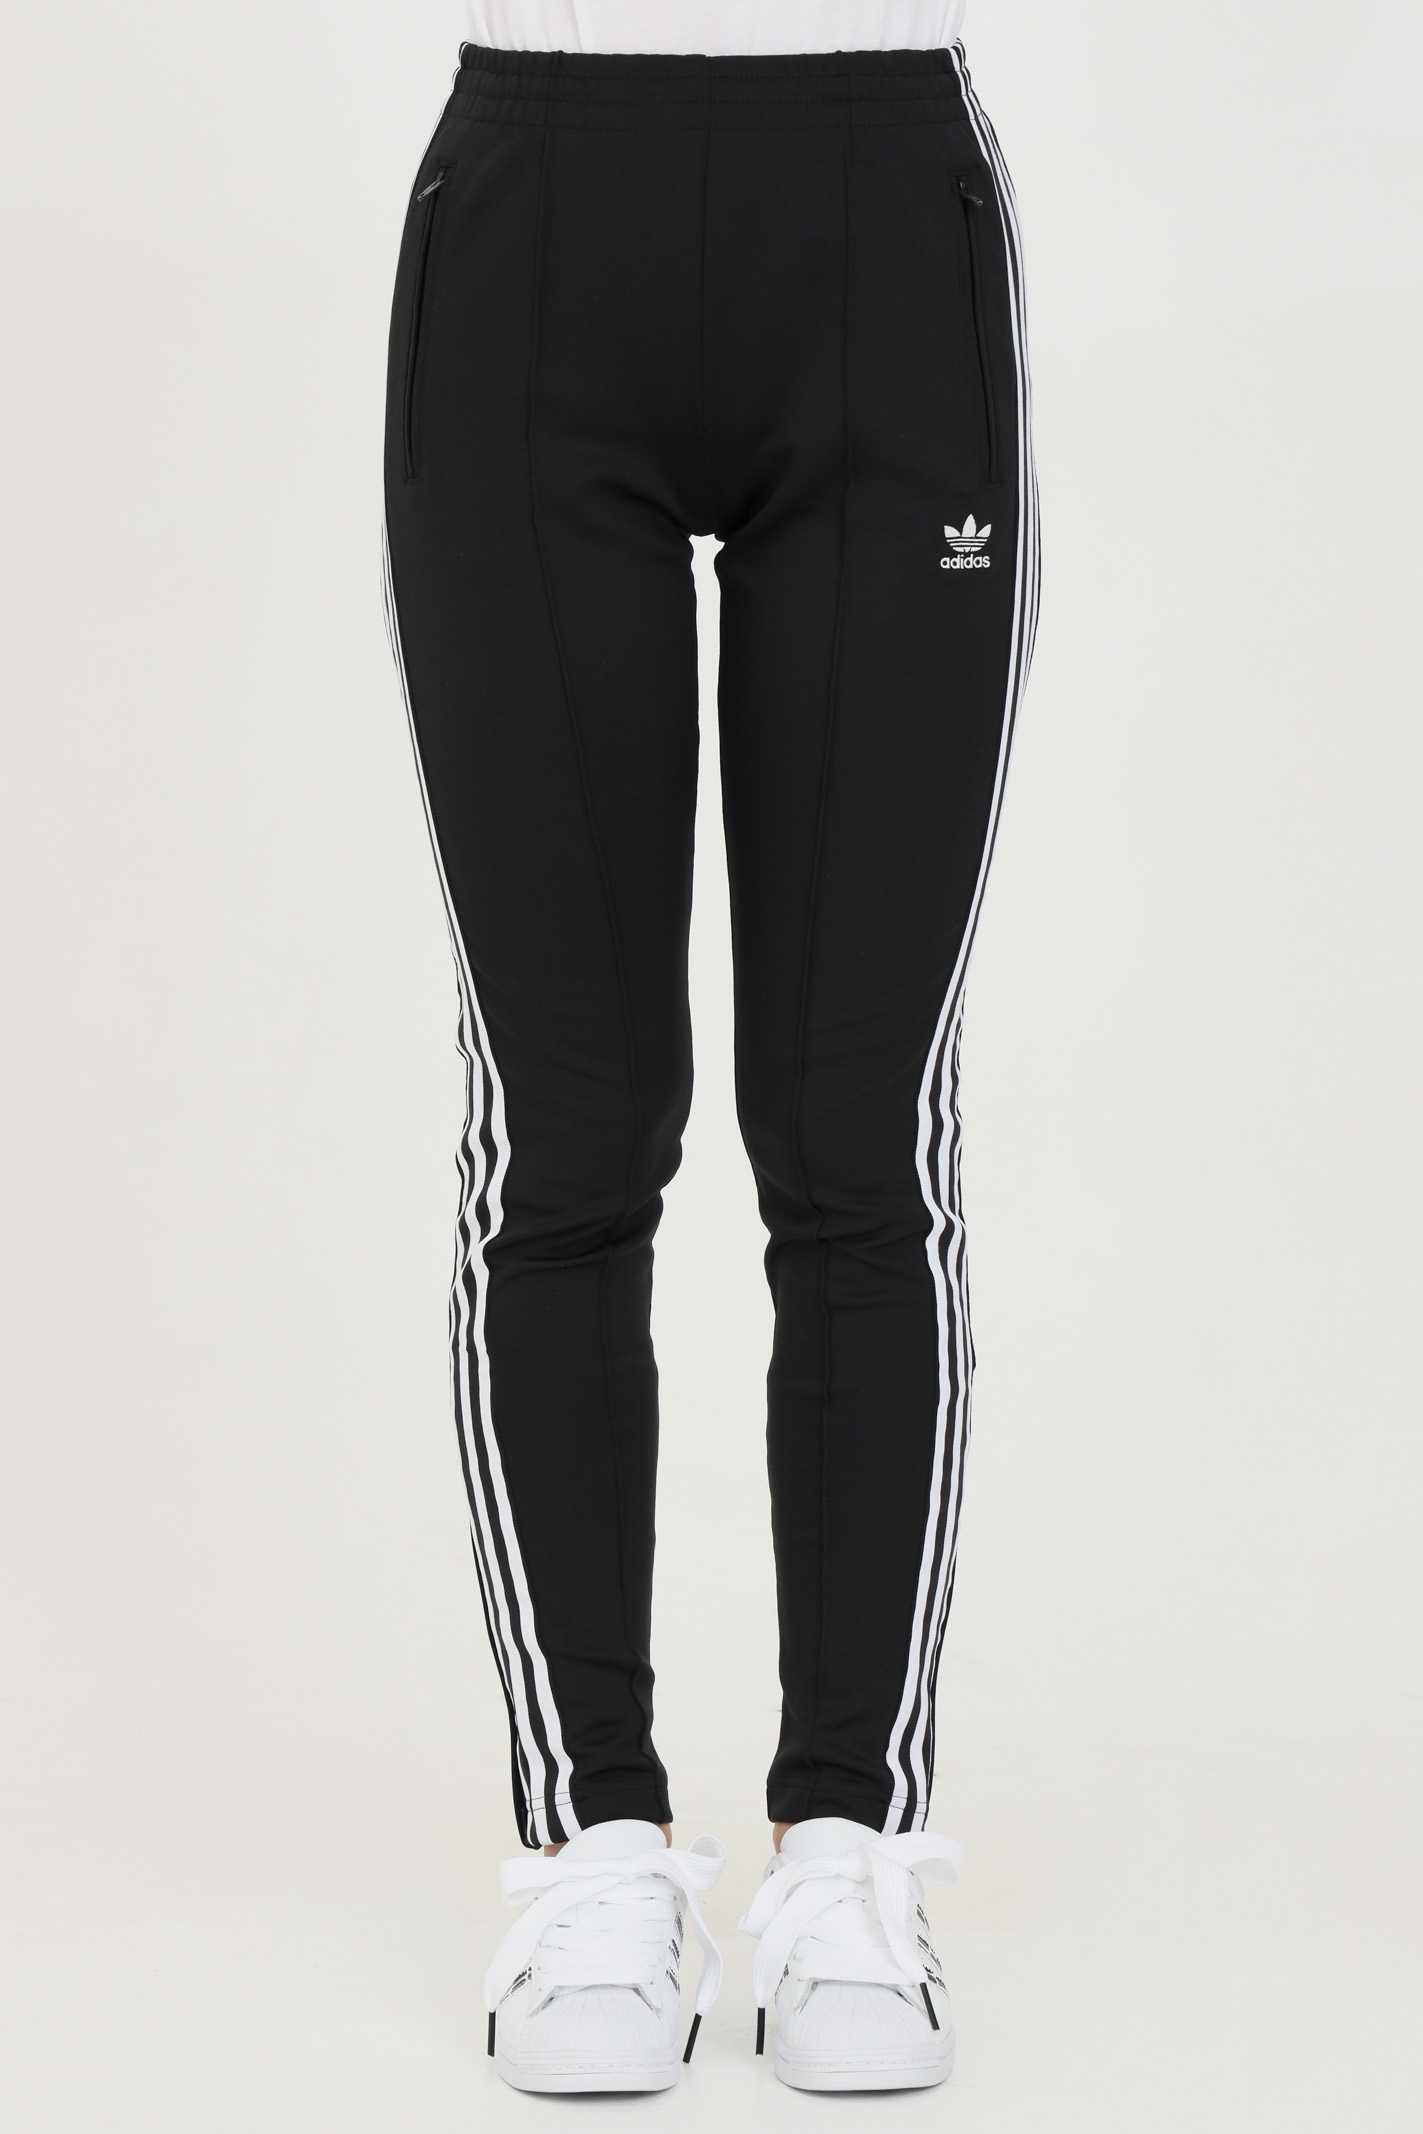 Black women's sports trousers with 3 stripes and logo - ADIDAS